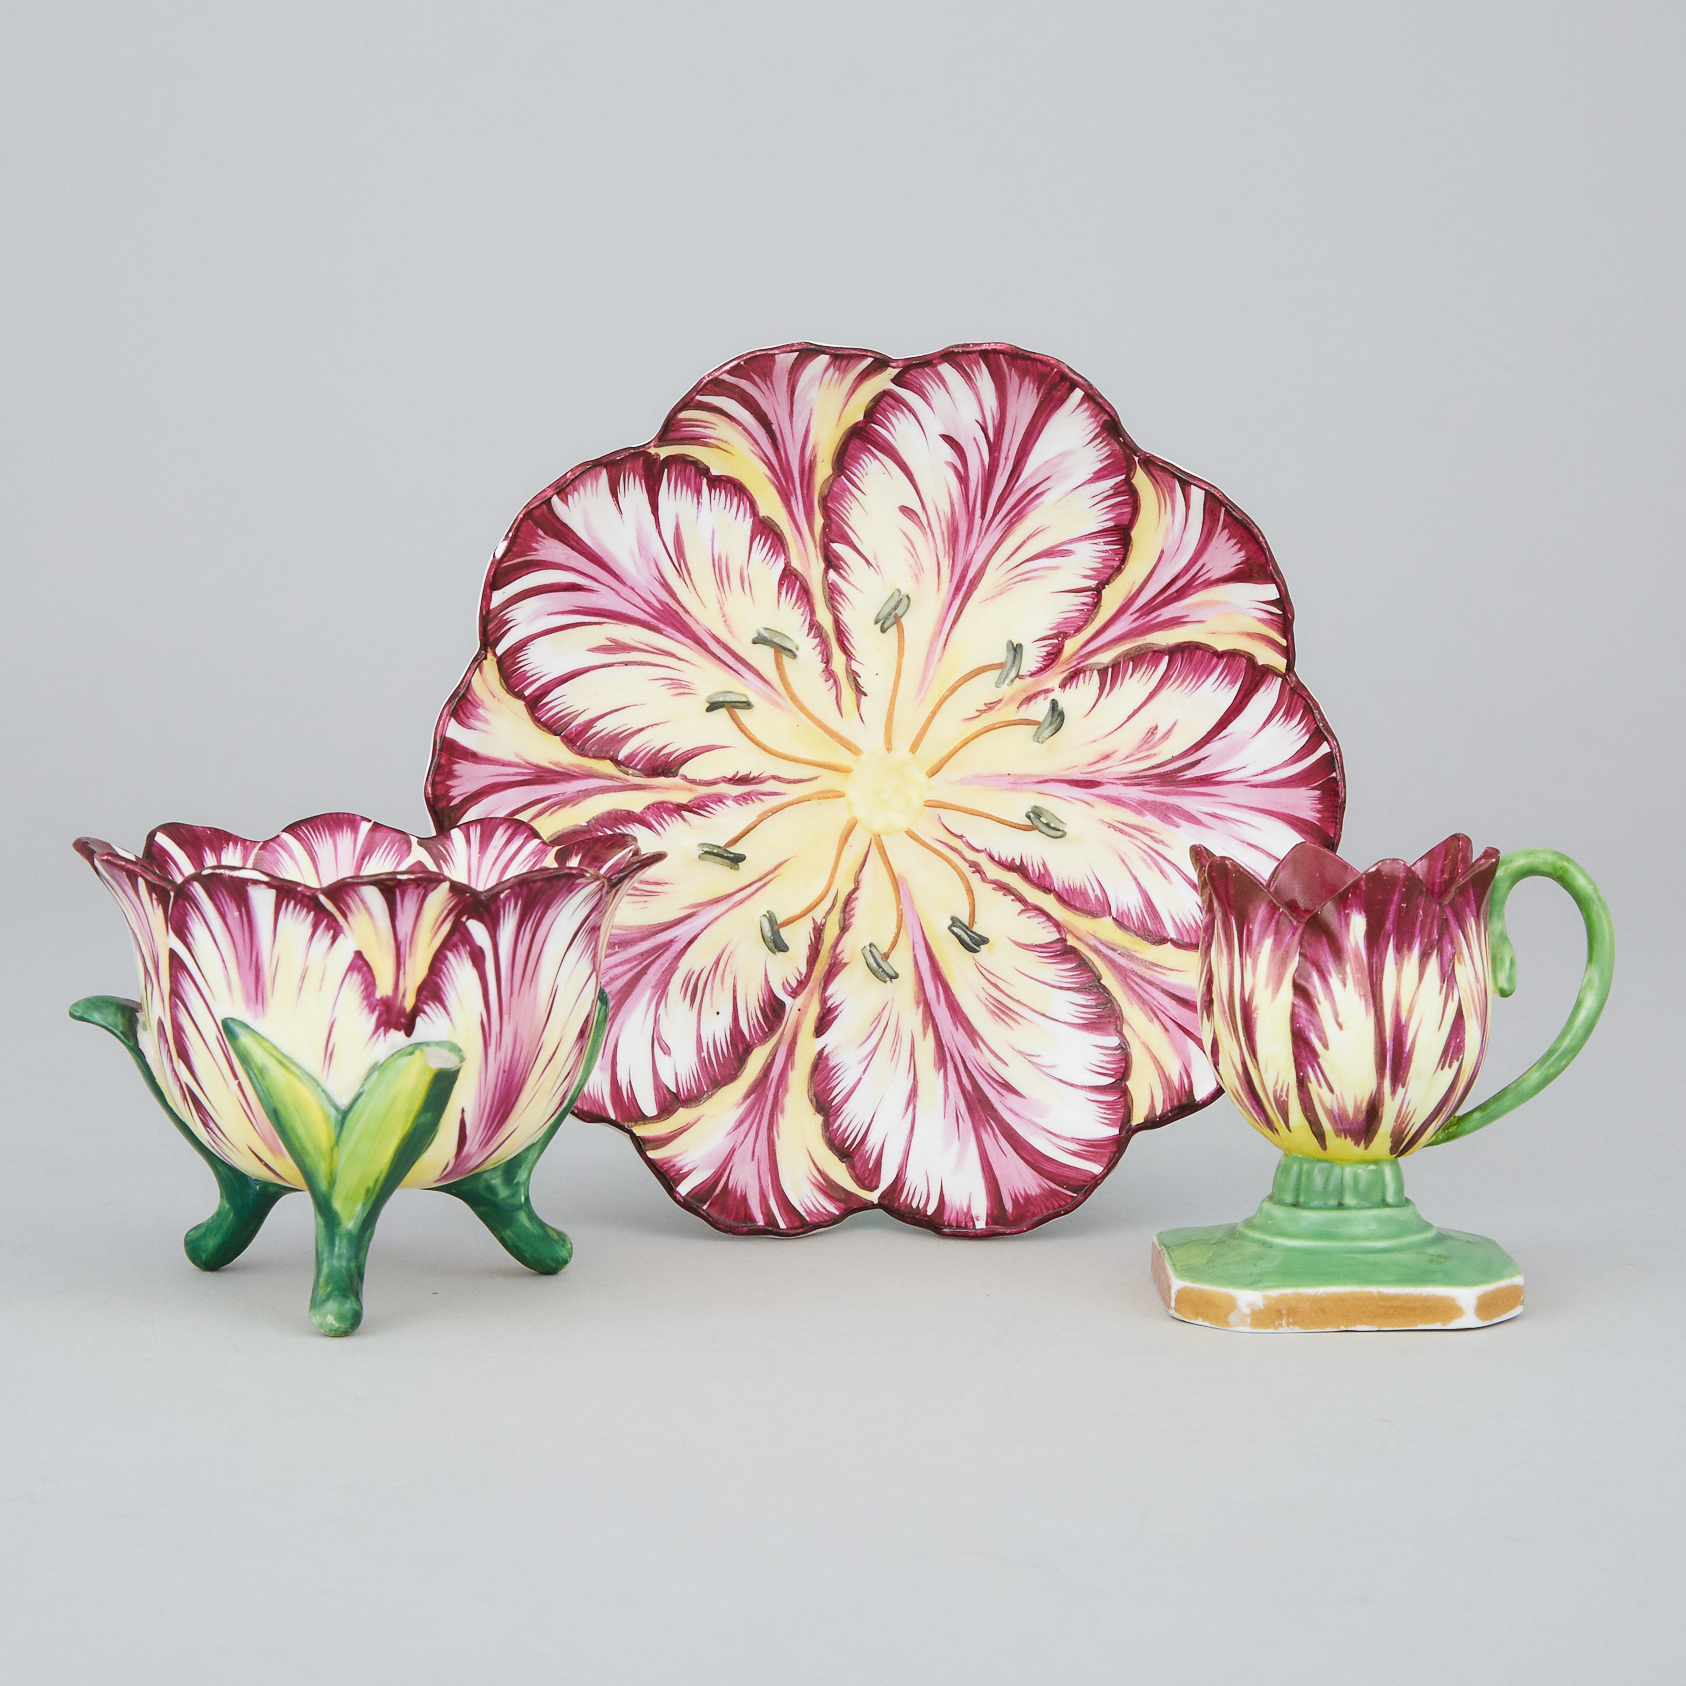 English Porcelain Tulip Cup and Saucer and a Small Cup, c.1830-40